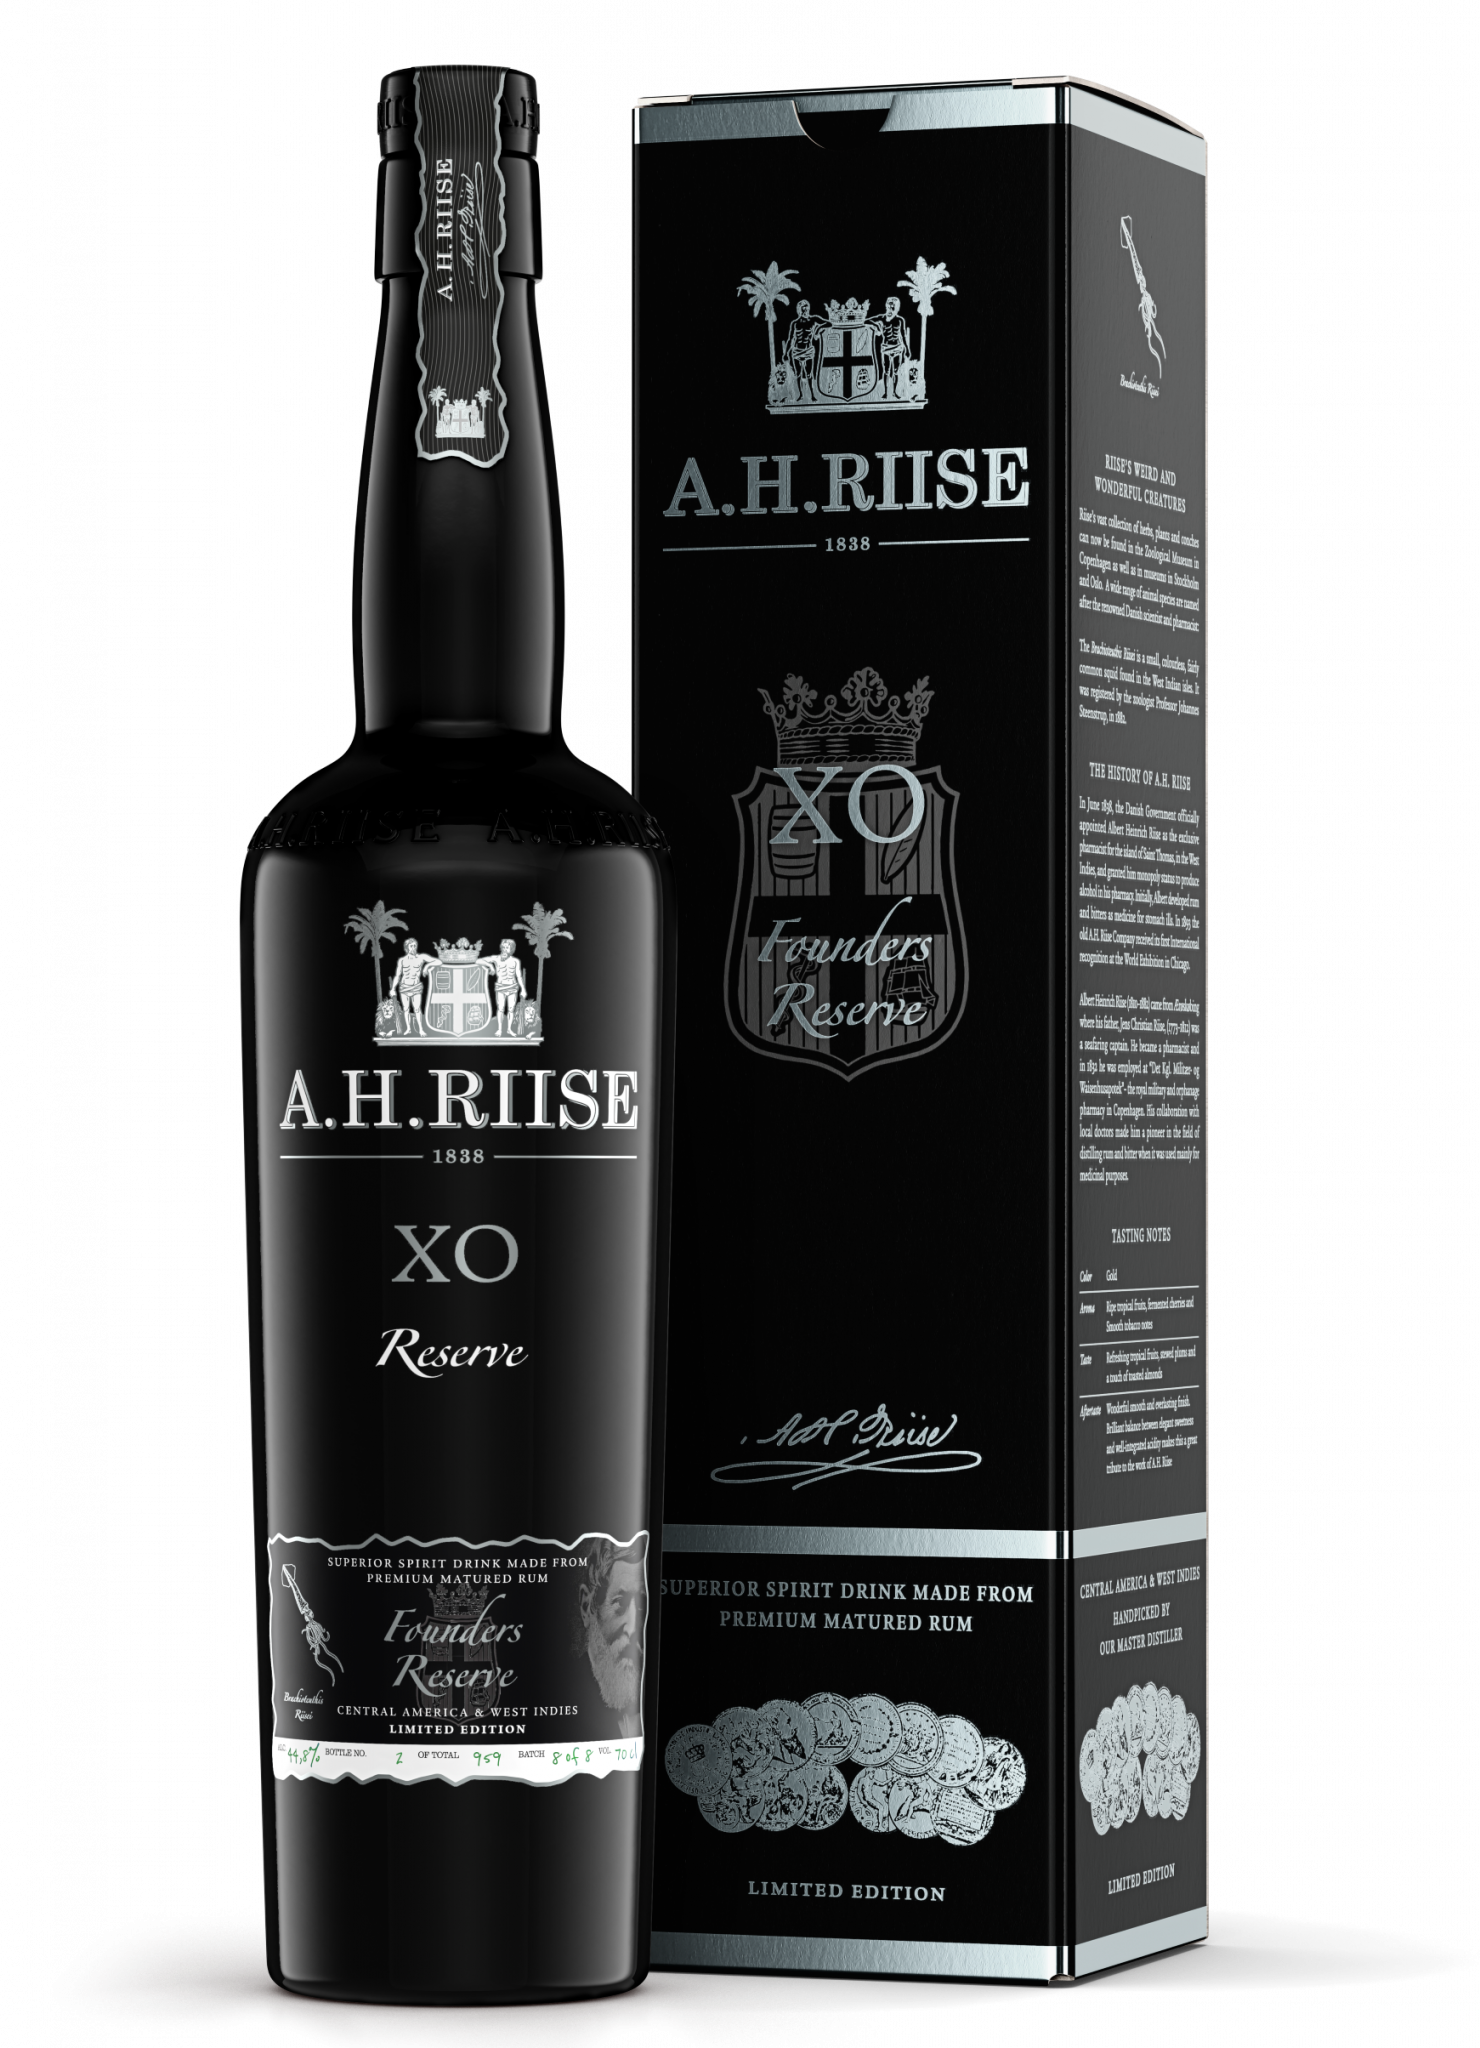 A.H. Riise XO Founders Reserve 3